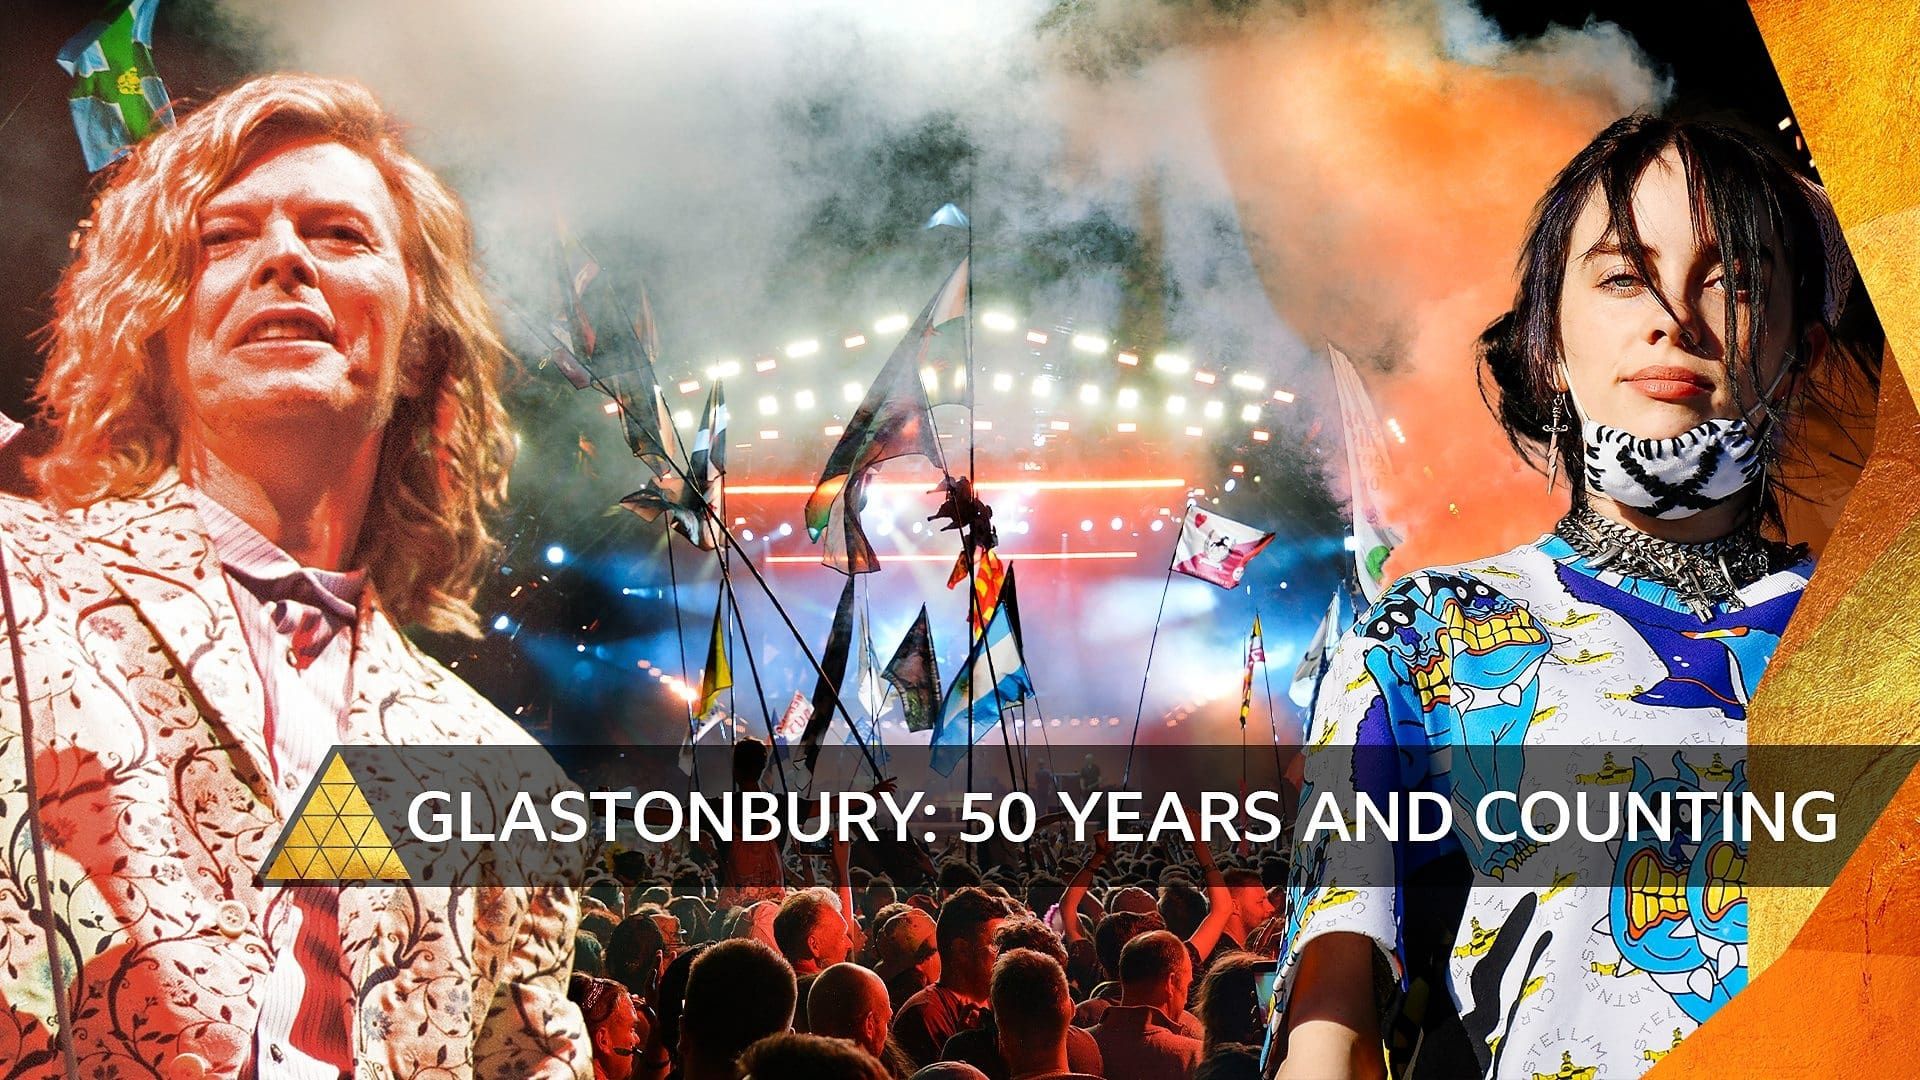 Glastonbury: 50 Years and Counting background